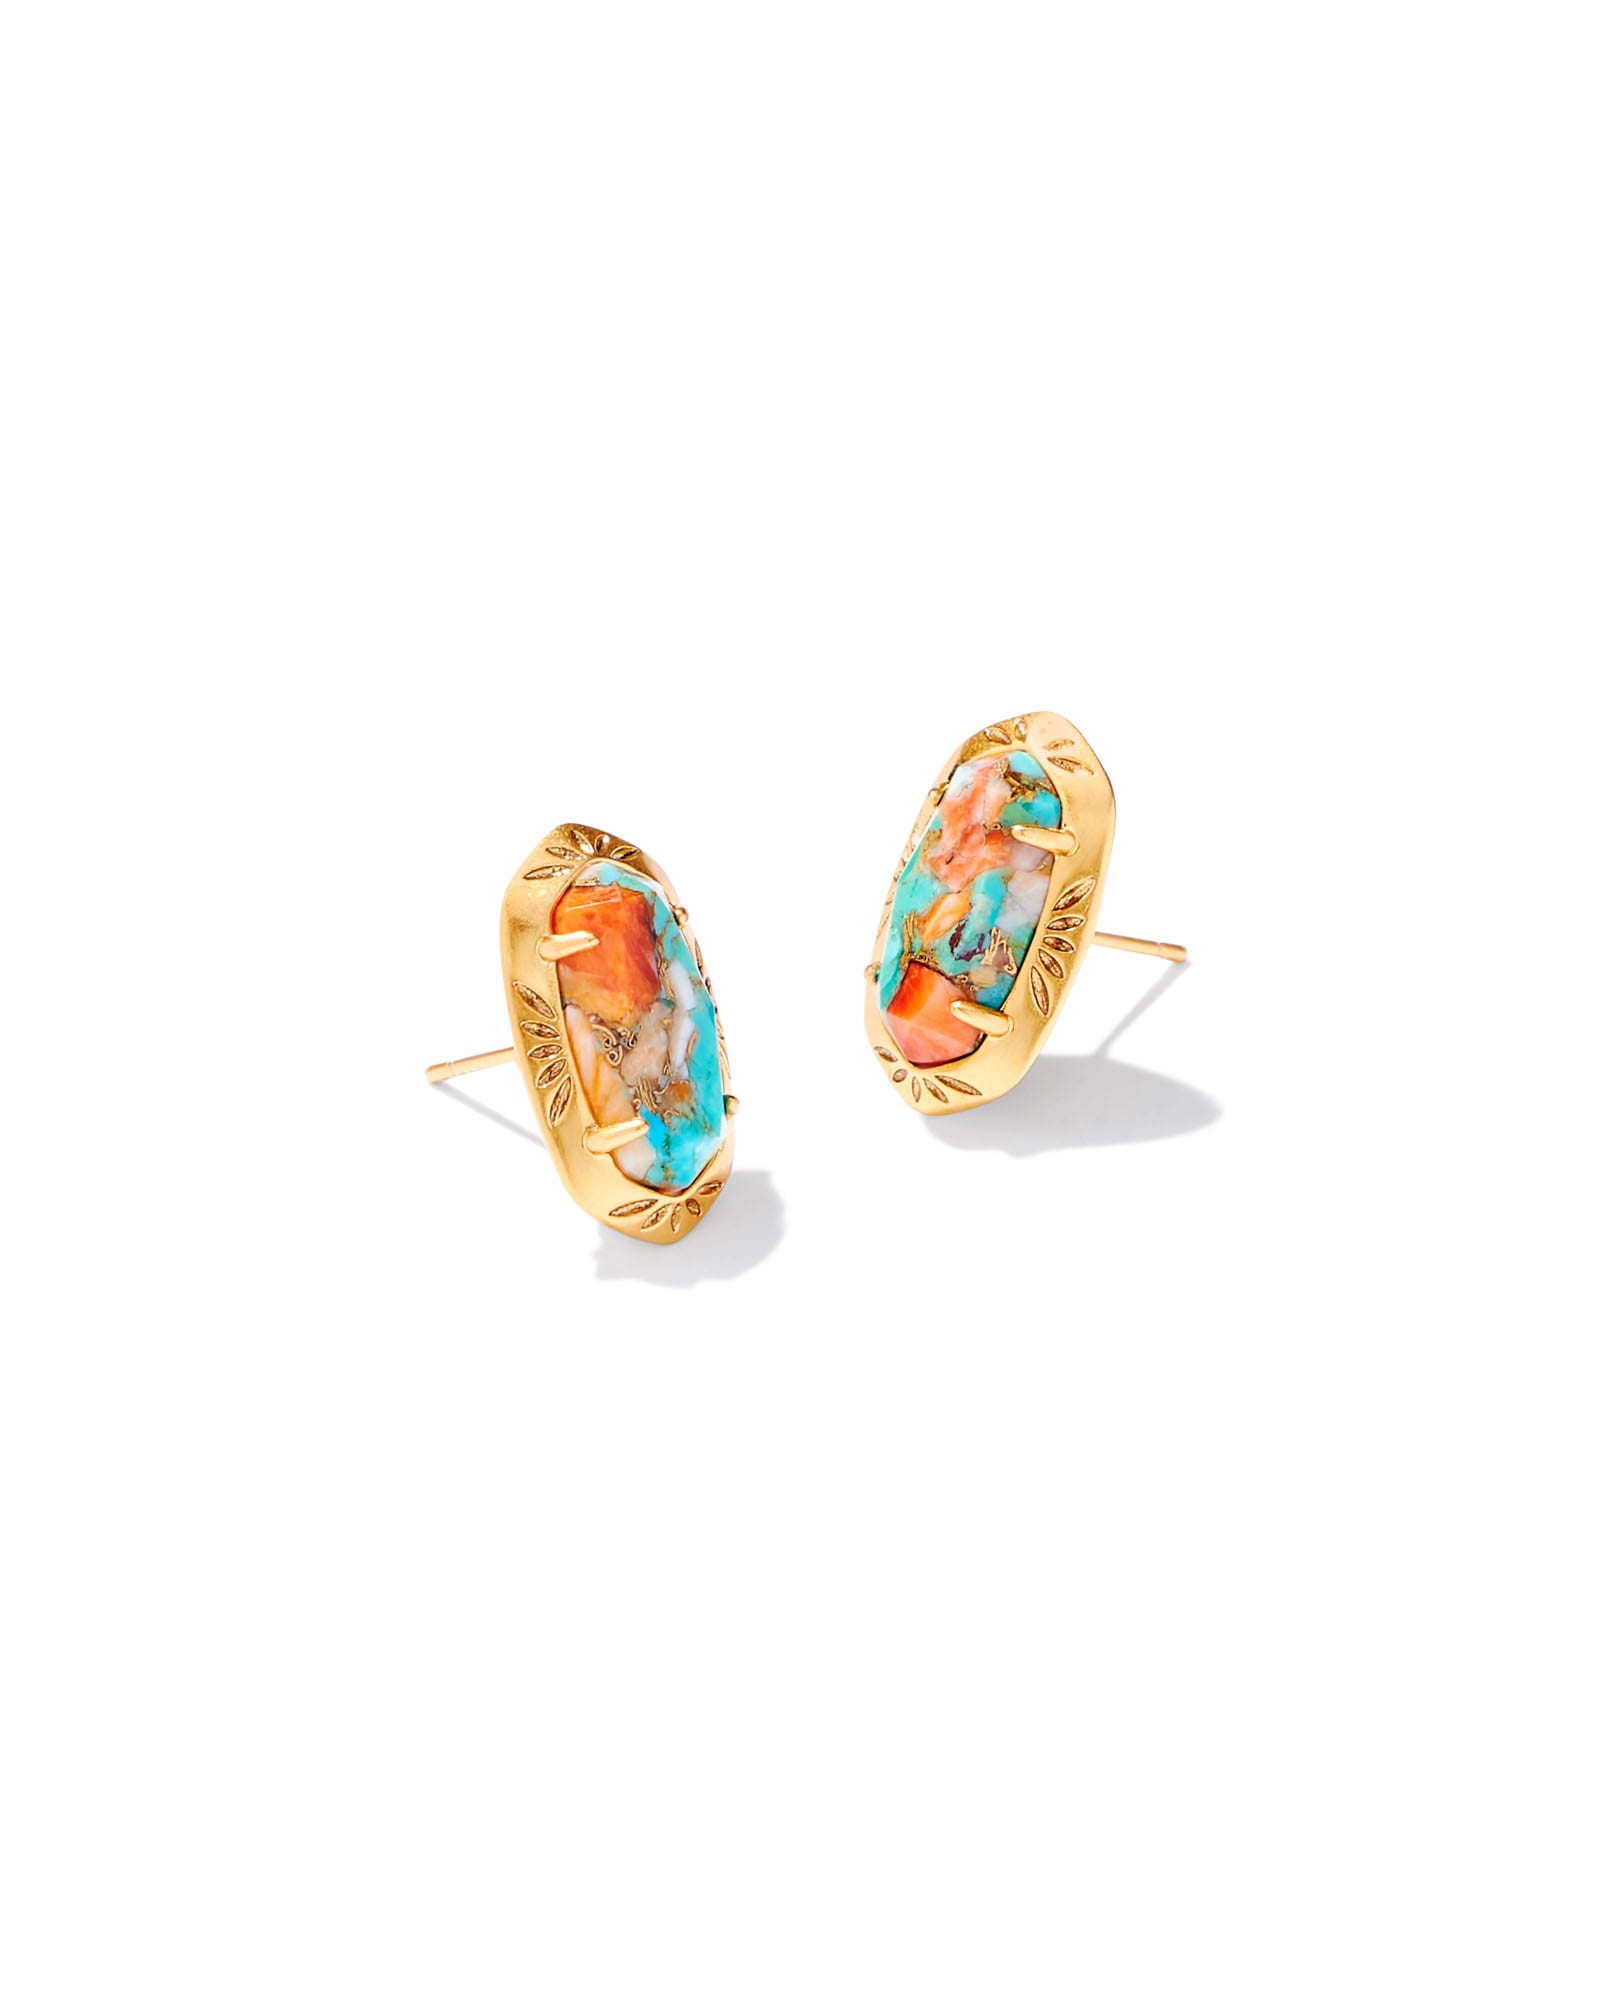 Ellie Vintage Gold Etch Frame Stud Earrings in Bronze Veined Turquoise Magnesite Red Oyster